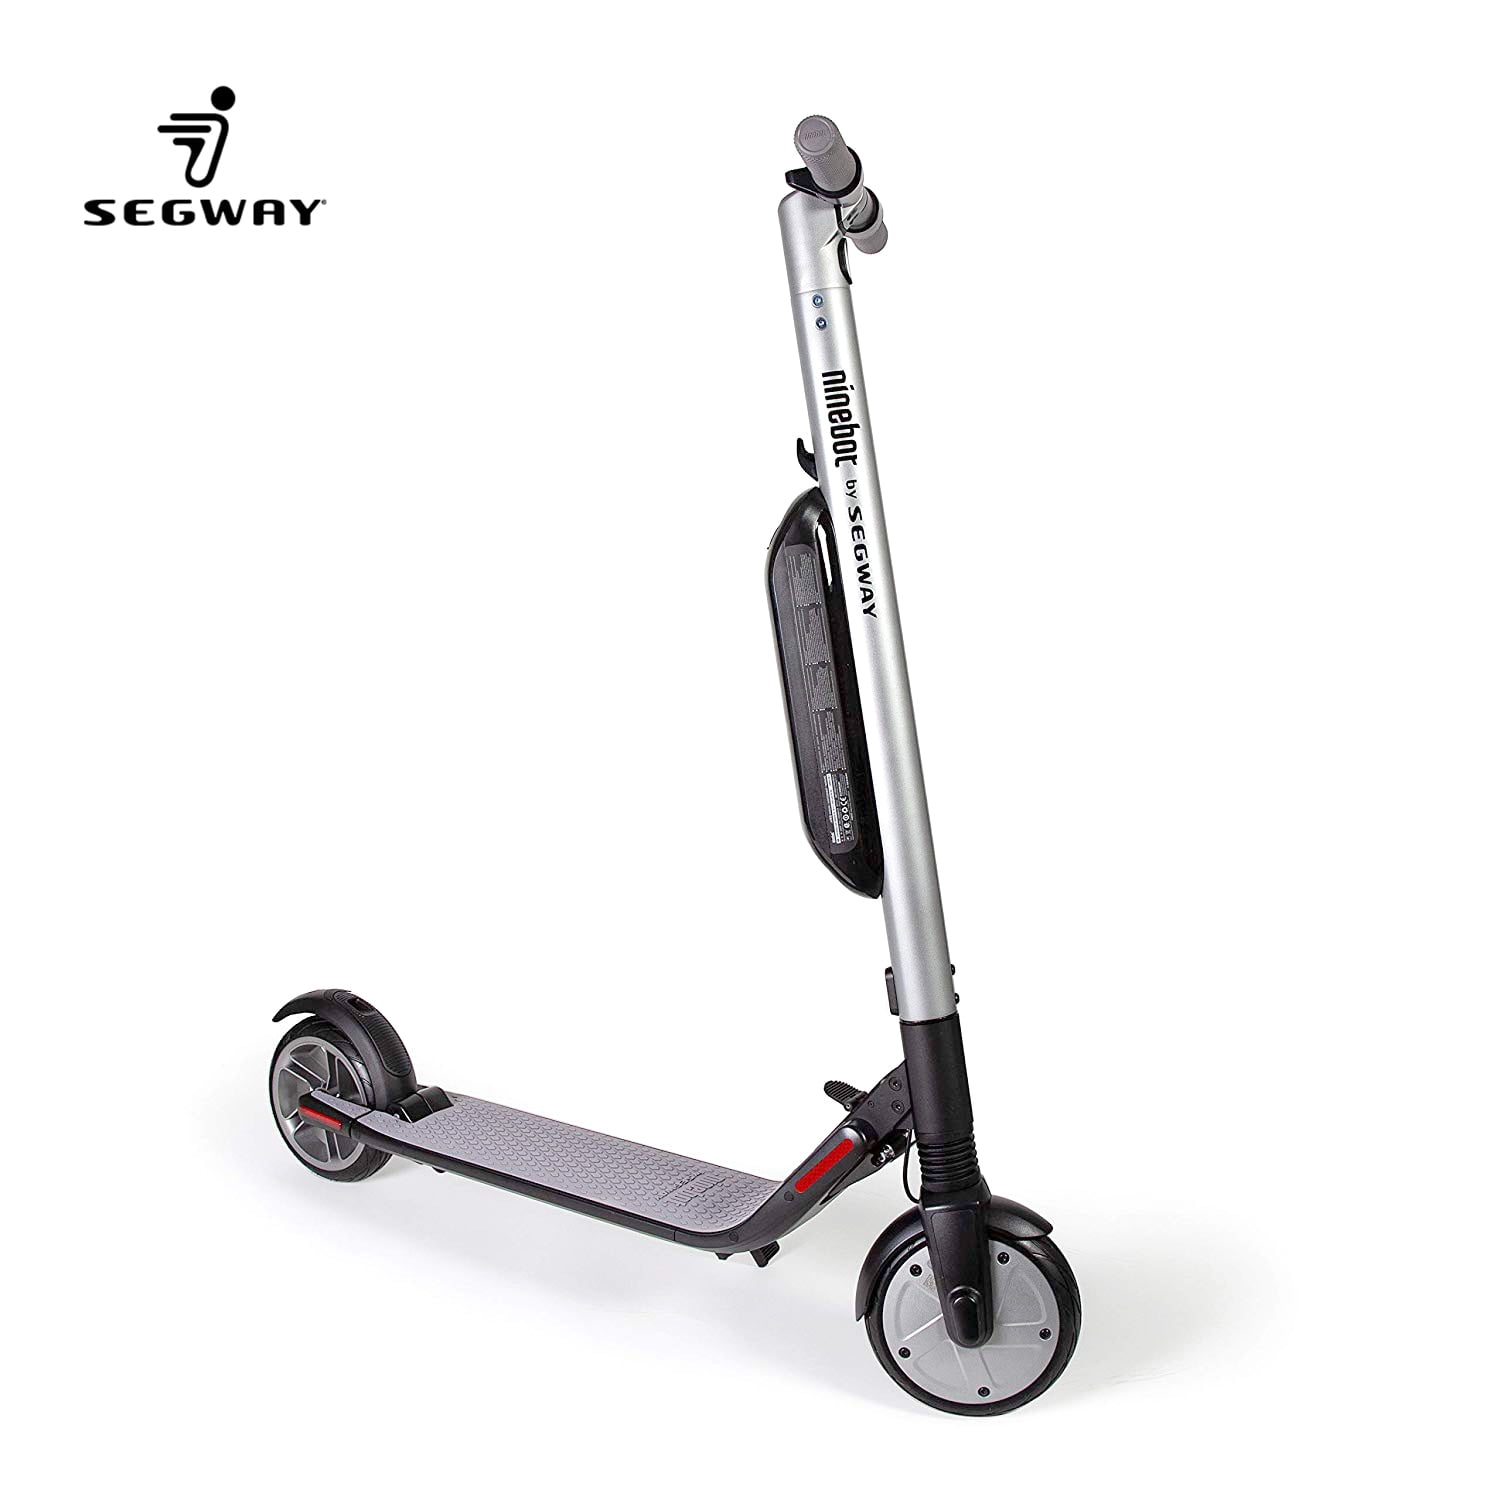 Mile　High-Performance　28　Bluetooth　cruise　Scooter　Connectivity,　APP　800W　Electric　Foldable　control　Speed,　Top　Range,　18.6　mph　KickScooter　Ninebot　ES4　Segway　Mobile